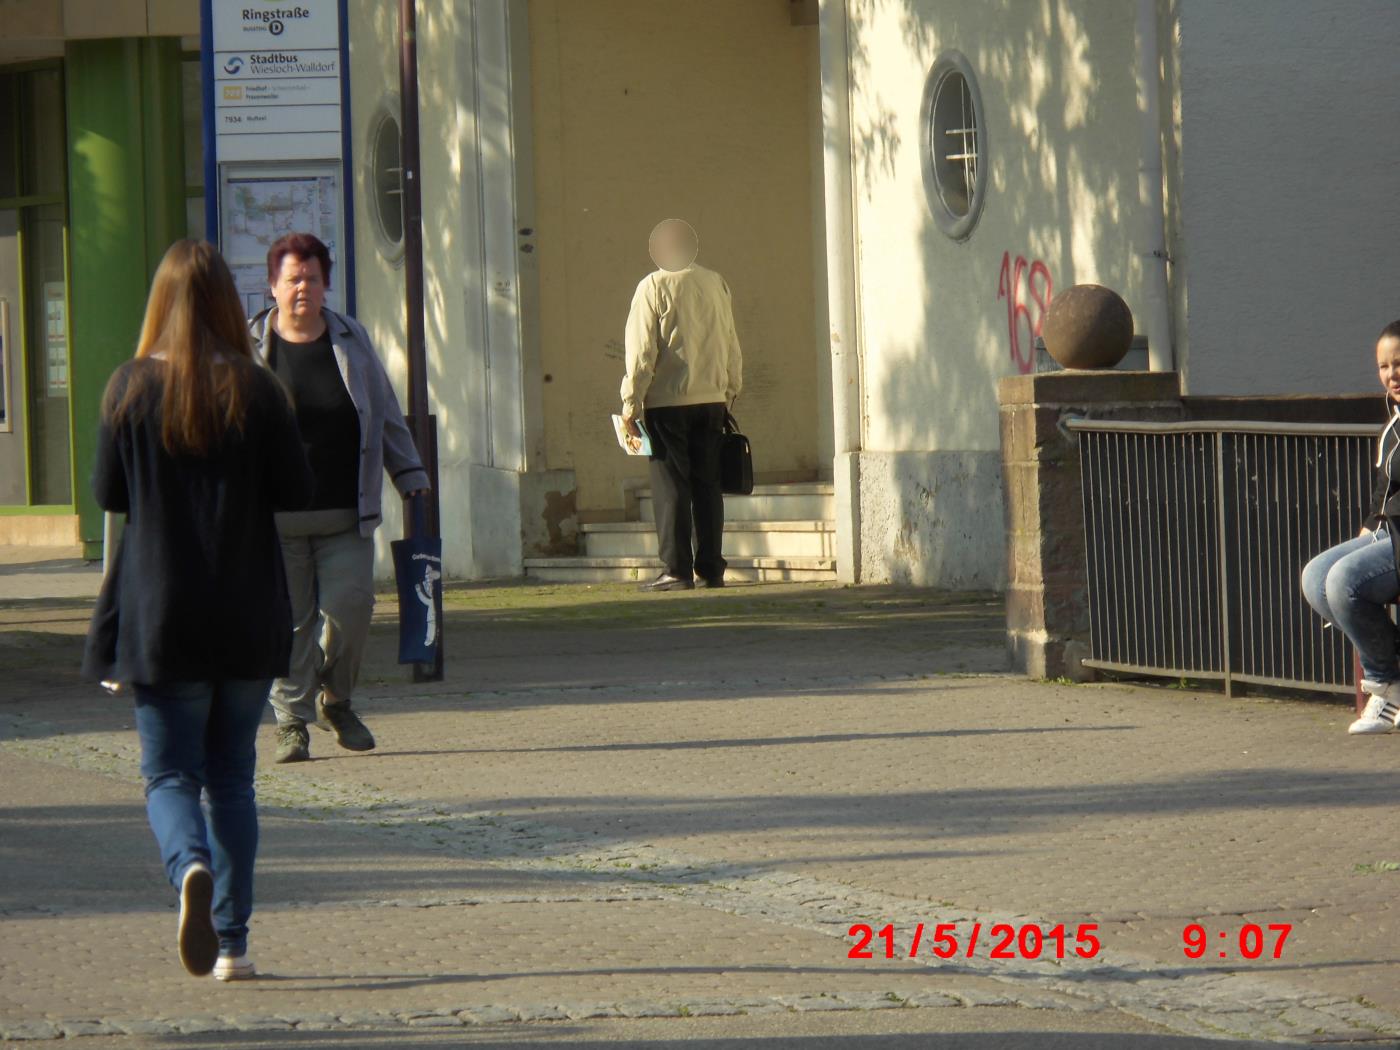 Wiesloch teems with Jehovah's Witnesses